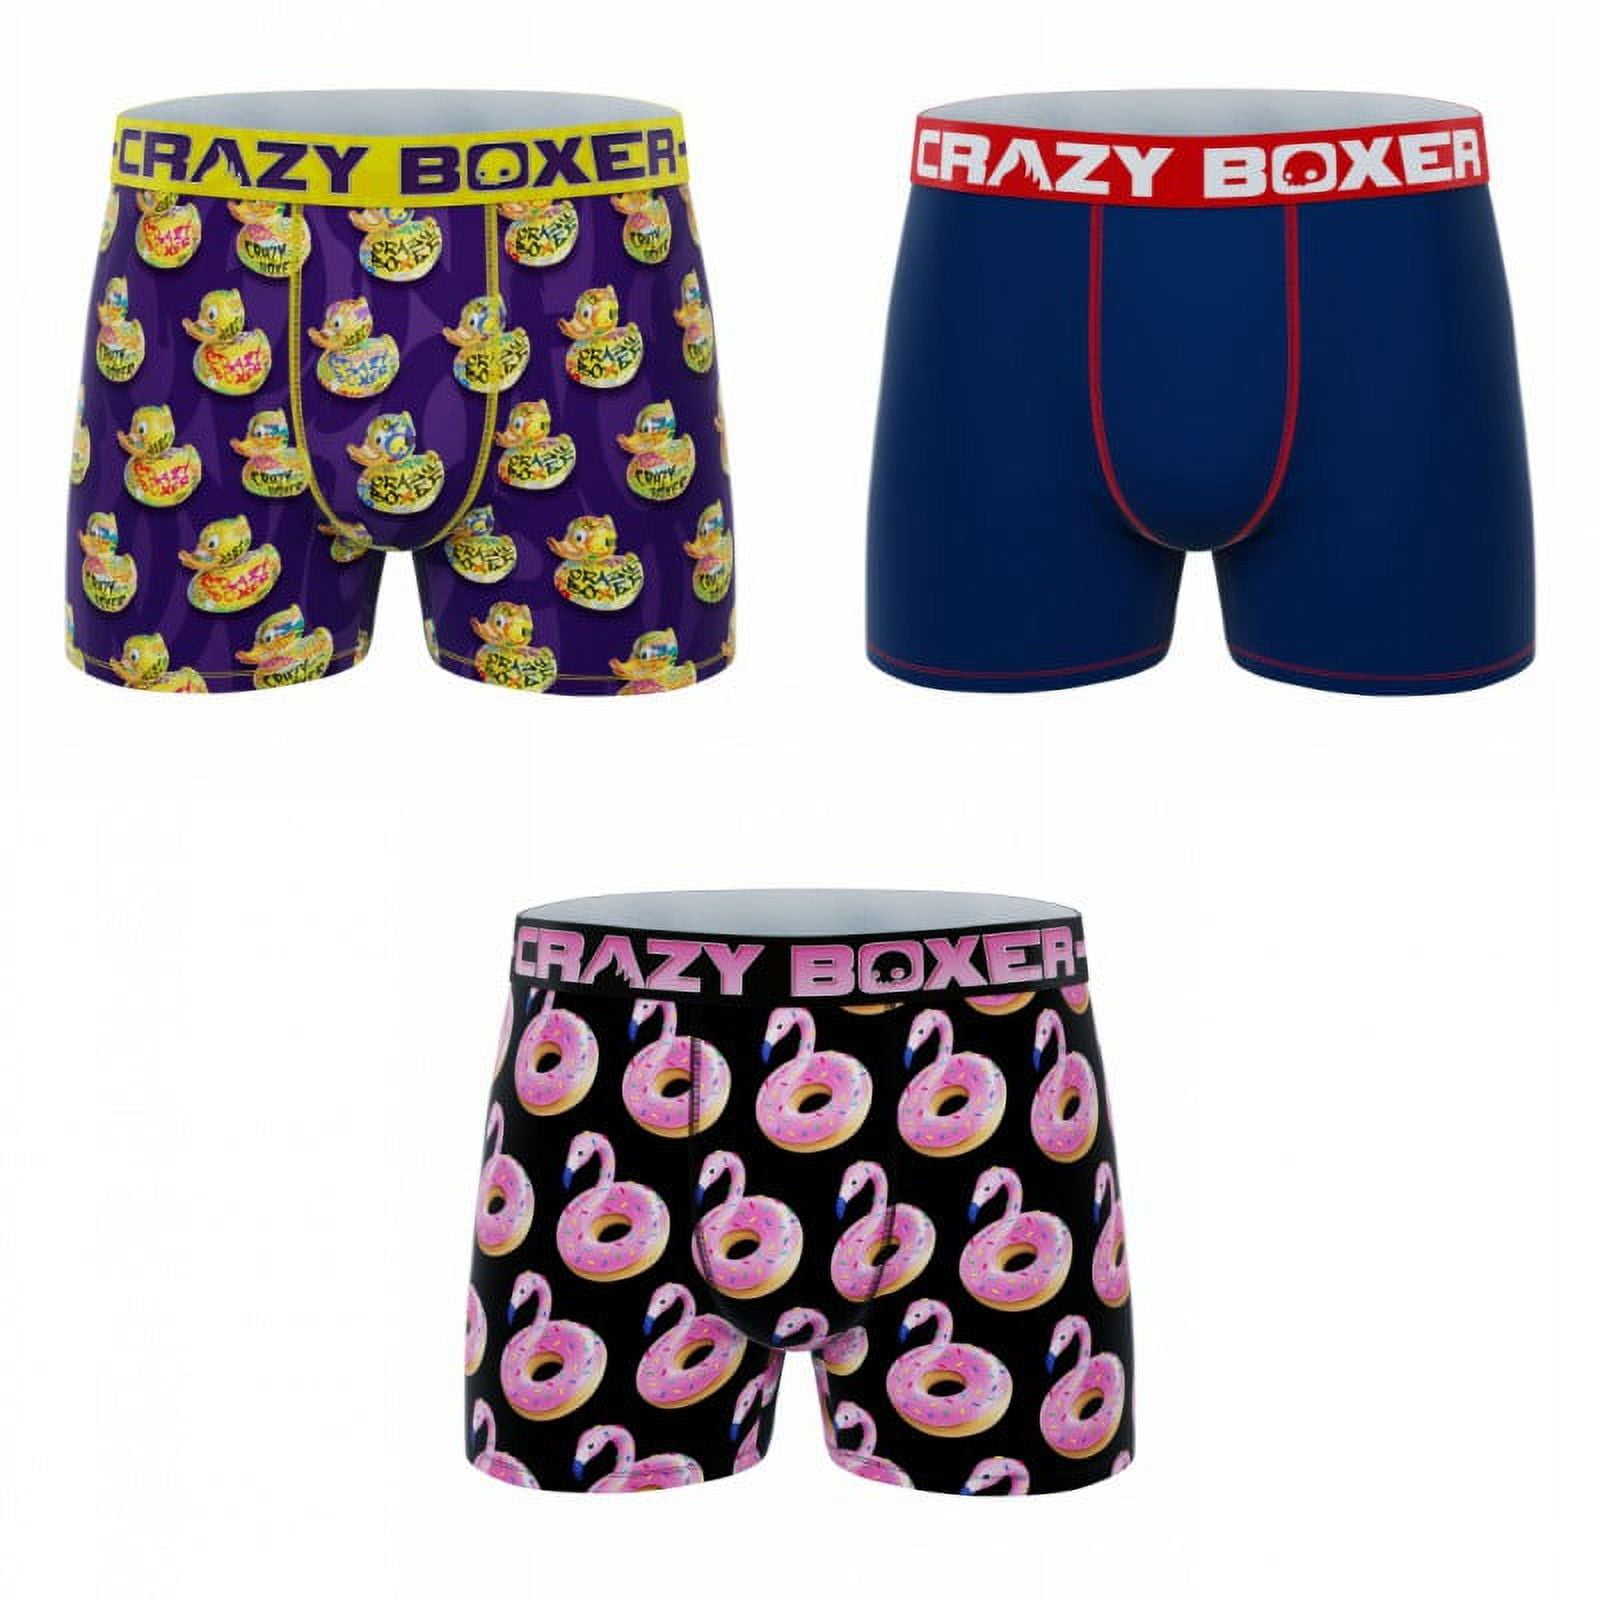 CRAZYBOXER Premium Tropical And Donuts; Men's Boxer Briefs, 3 Pack 